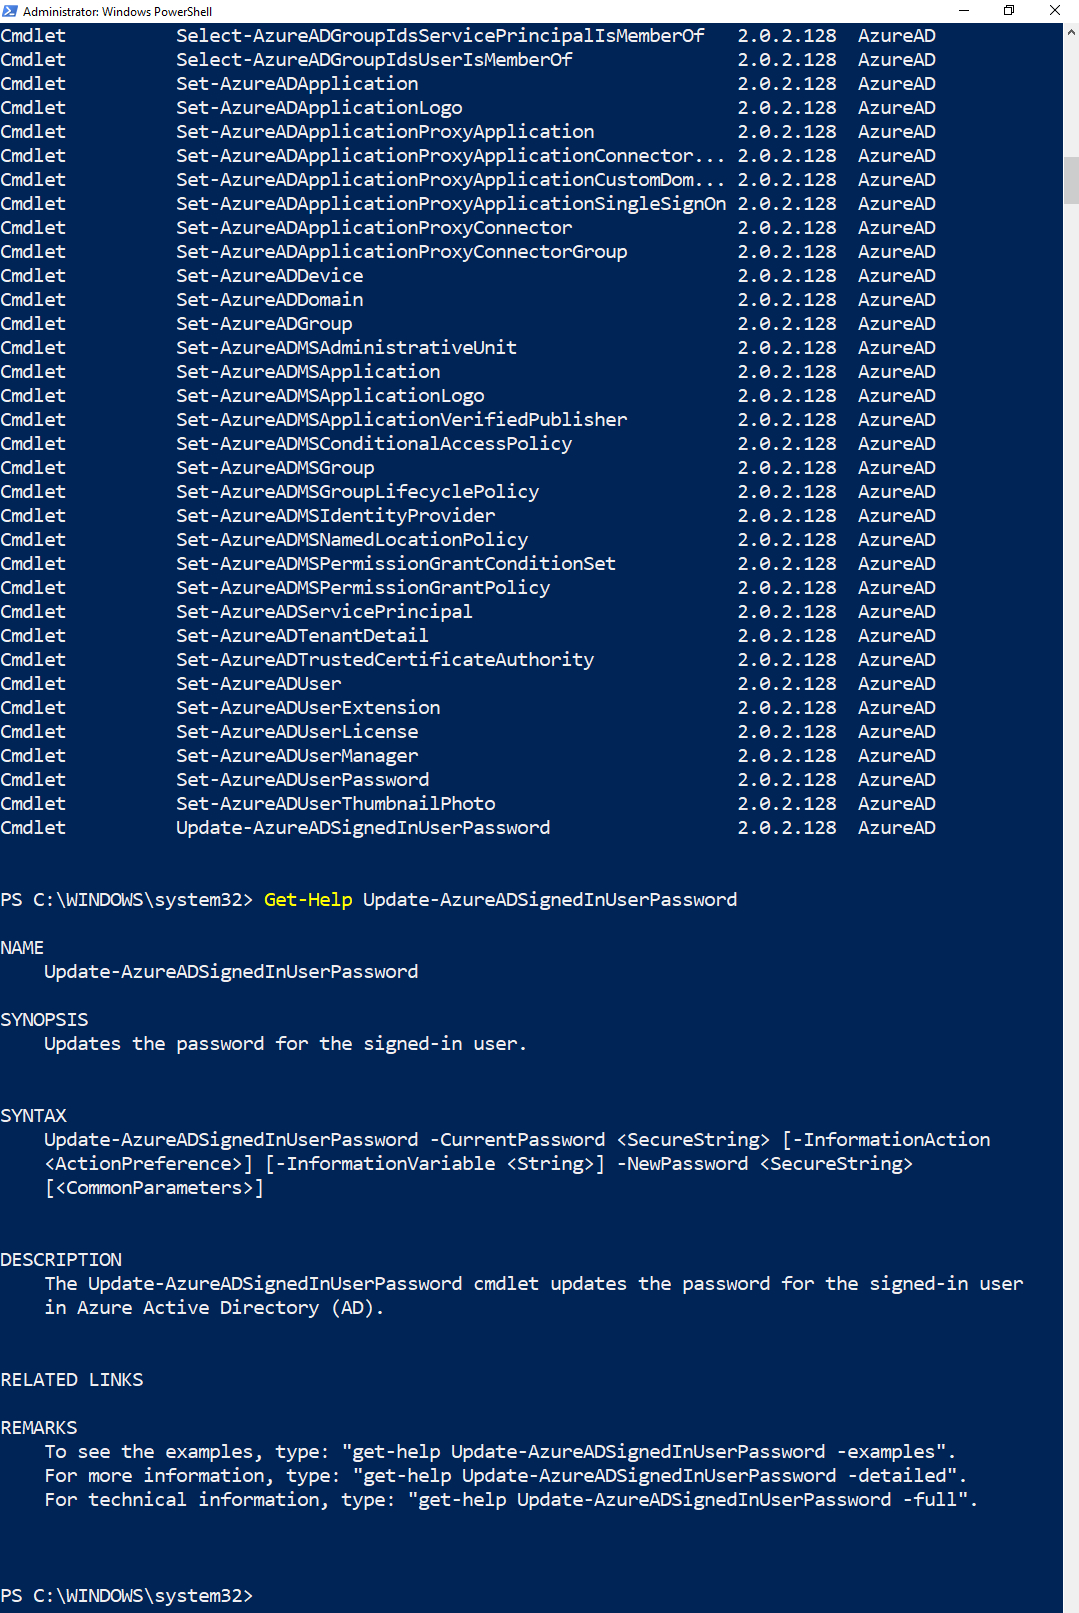 Example of the Get-Help command in PowerShell